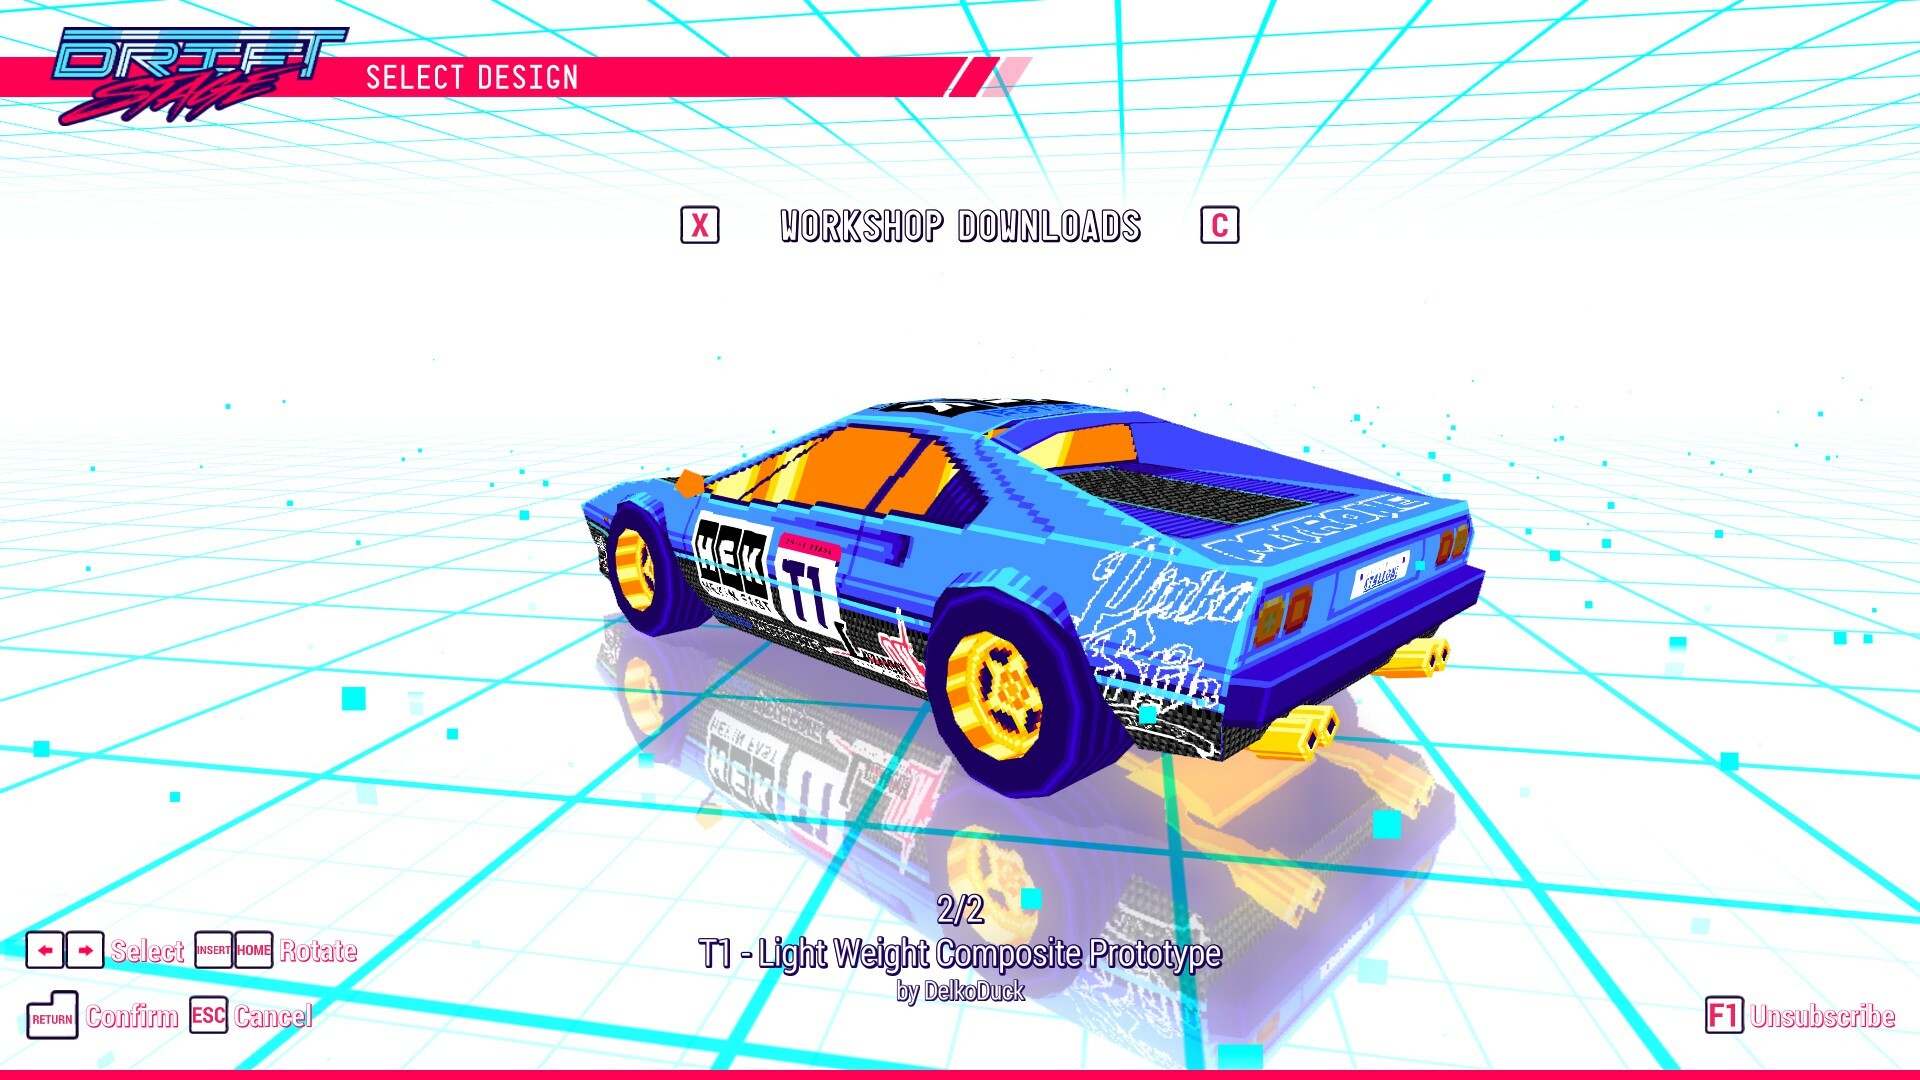 Drift Stage' may become one of our favorite car racing games